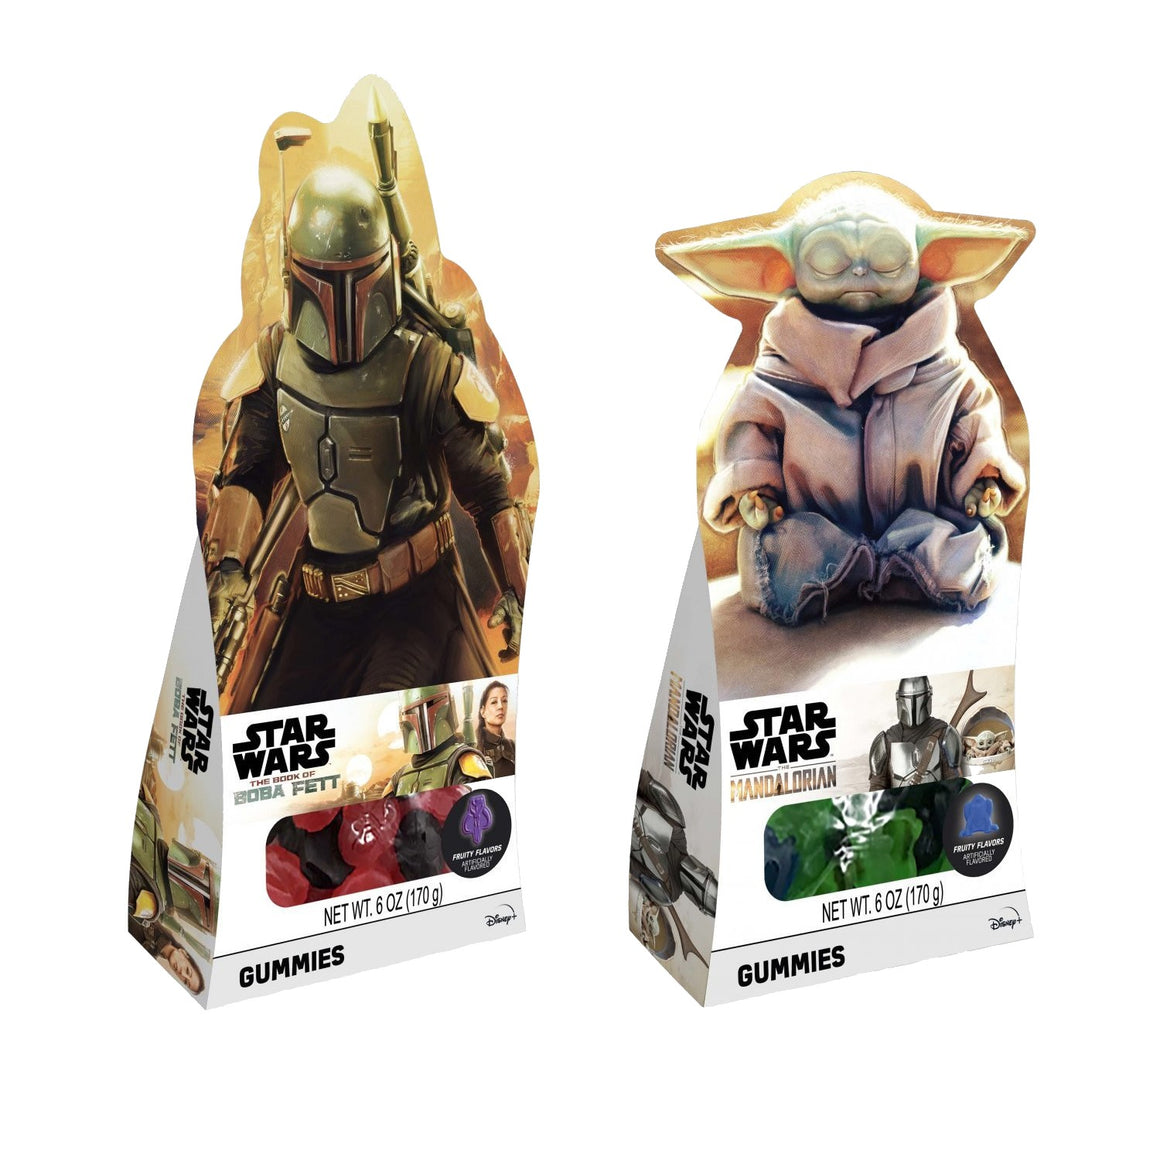 All City Candy Star Wars The Mandalorian Gummy 6 oz. Gift Box Gummi Candyrific For fresh candy and great service, visit www.allcitycandy.com